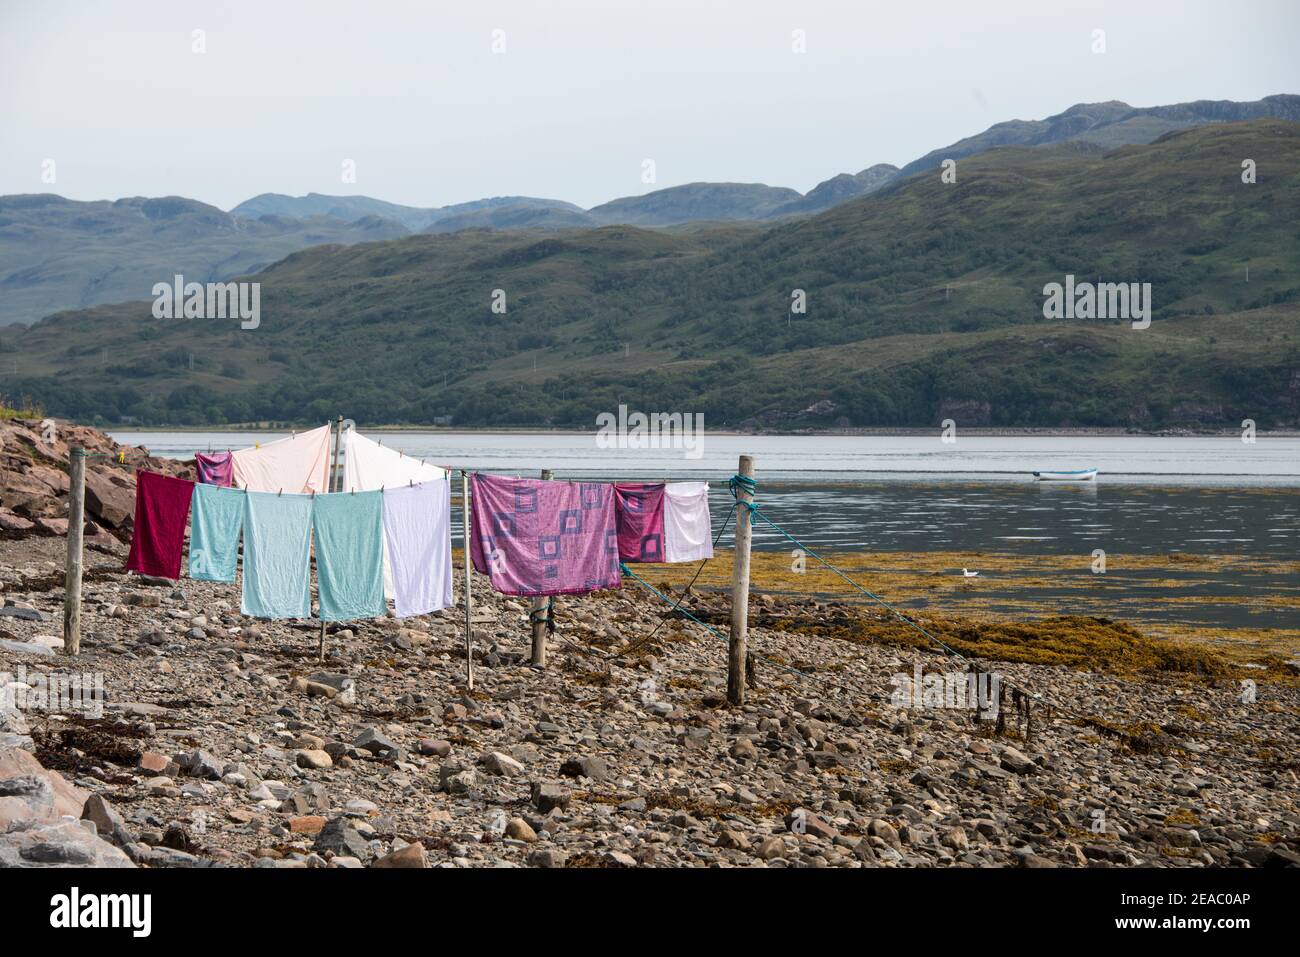 Laundry drying at low tide at the boat dock, Scotland Stock Photo